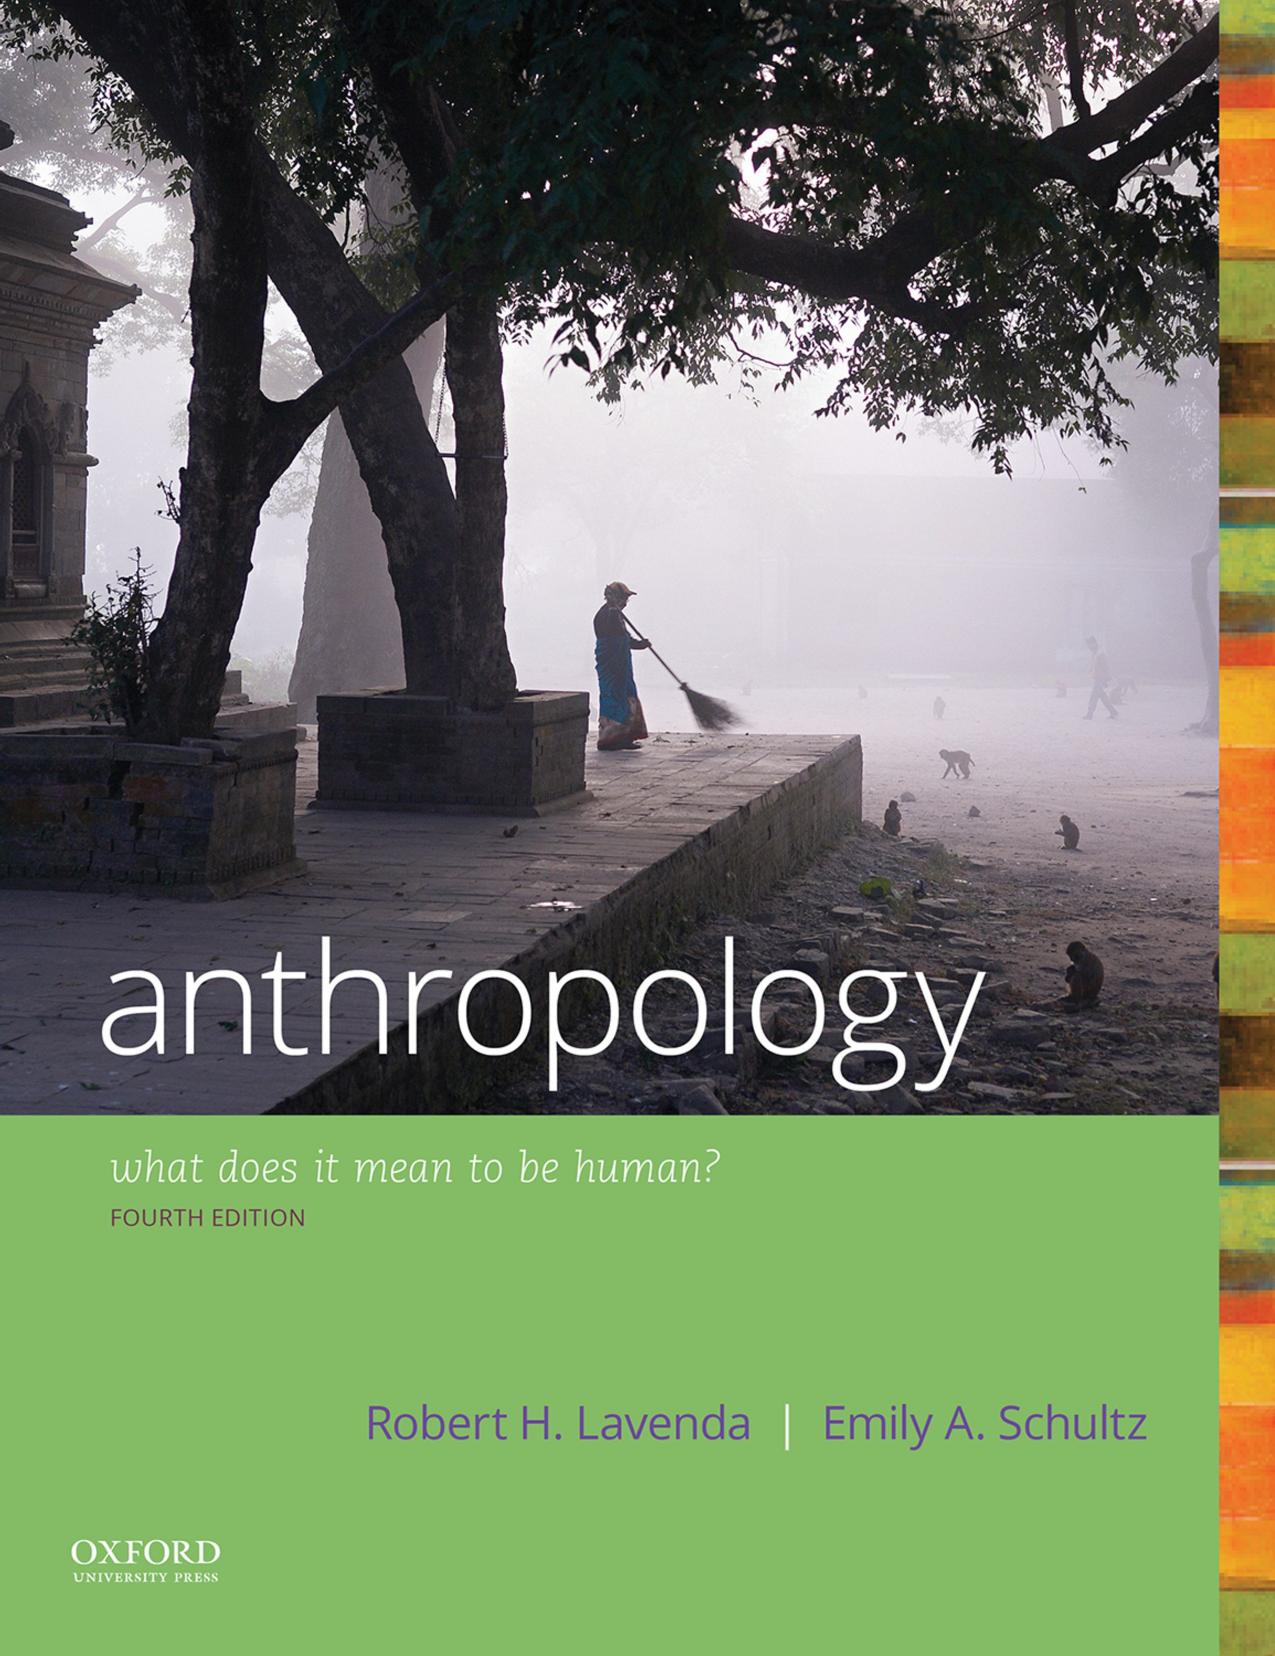 (eBook PDF)Anthropology What Does it Mean to Be Human 4th Edition by Robert H. Lavenda & Emily A. Schultz by Robert H. Lavenda , Emily A. Schultz